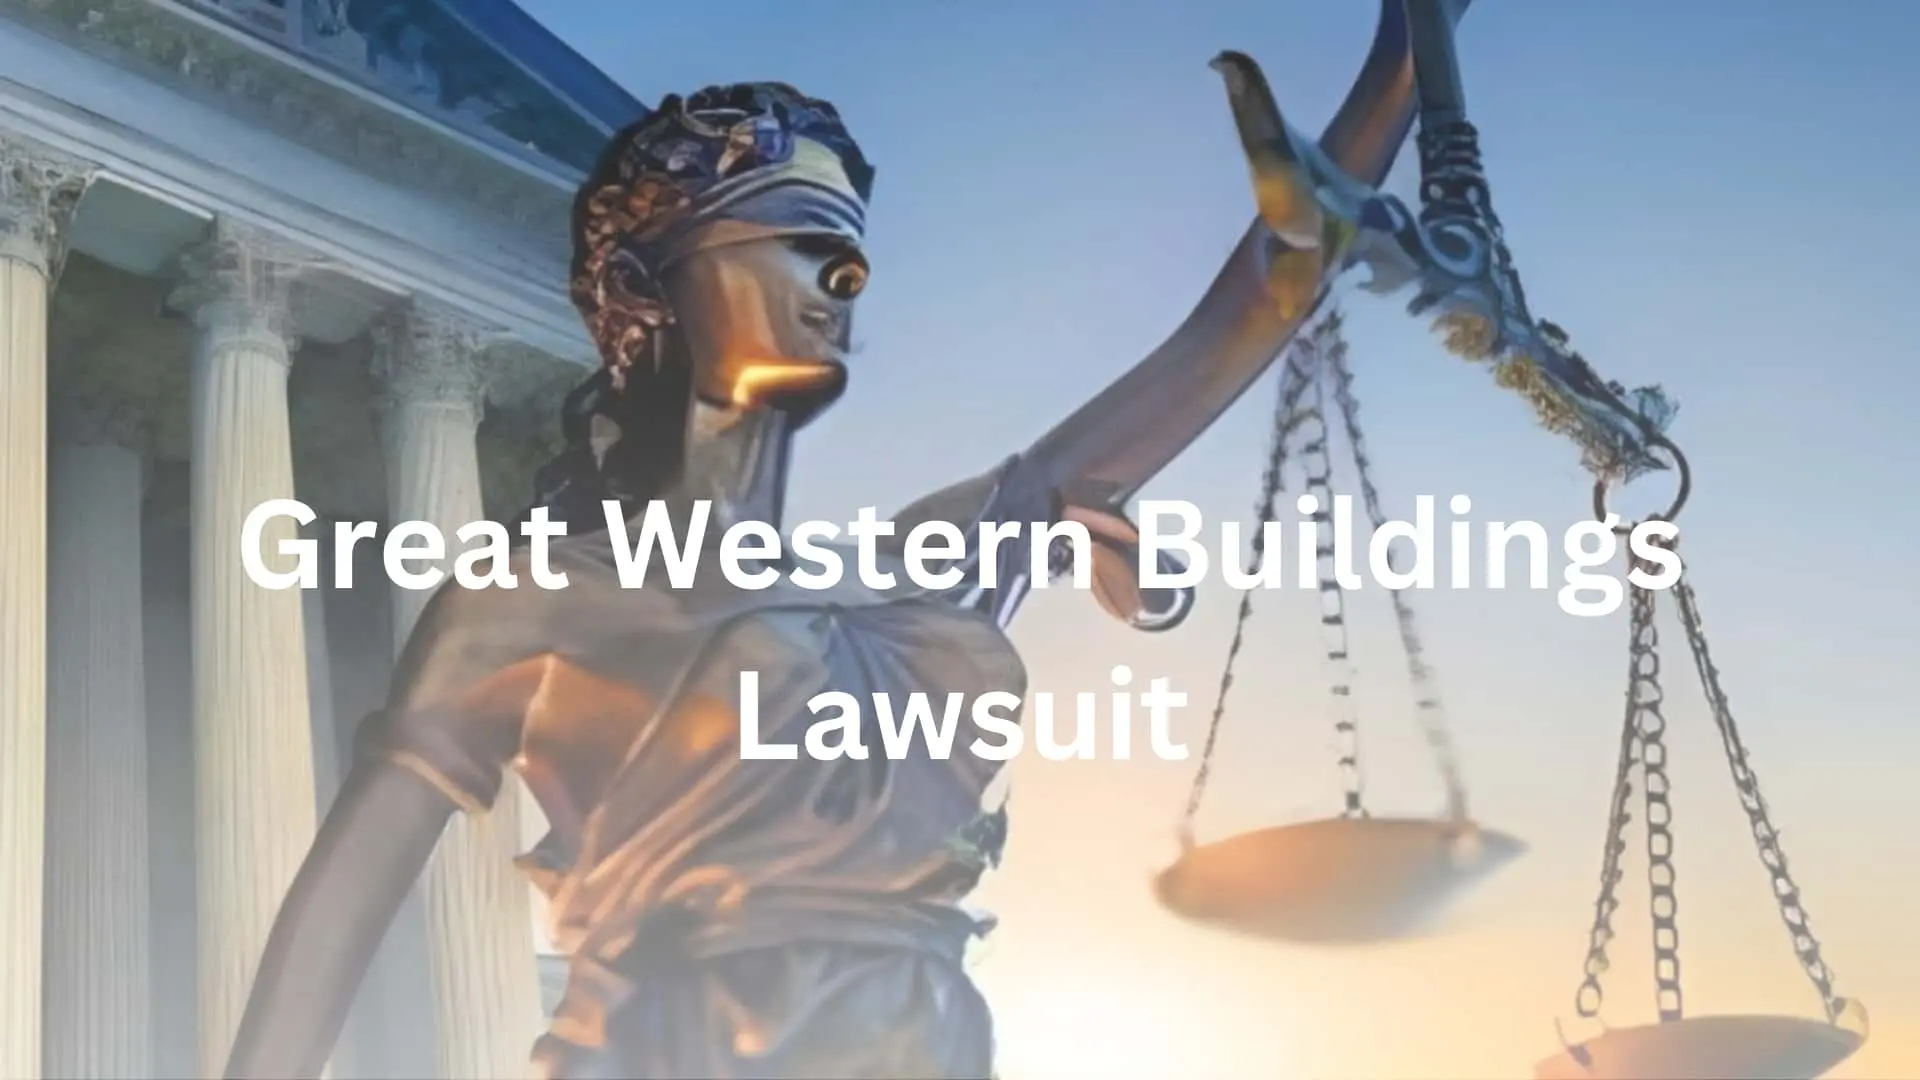 The Great Western Buildings Lawsuit: A Comprehensive Guide!